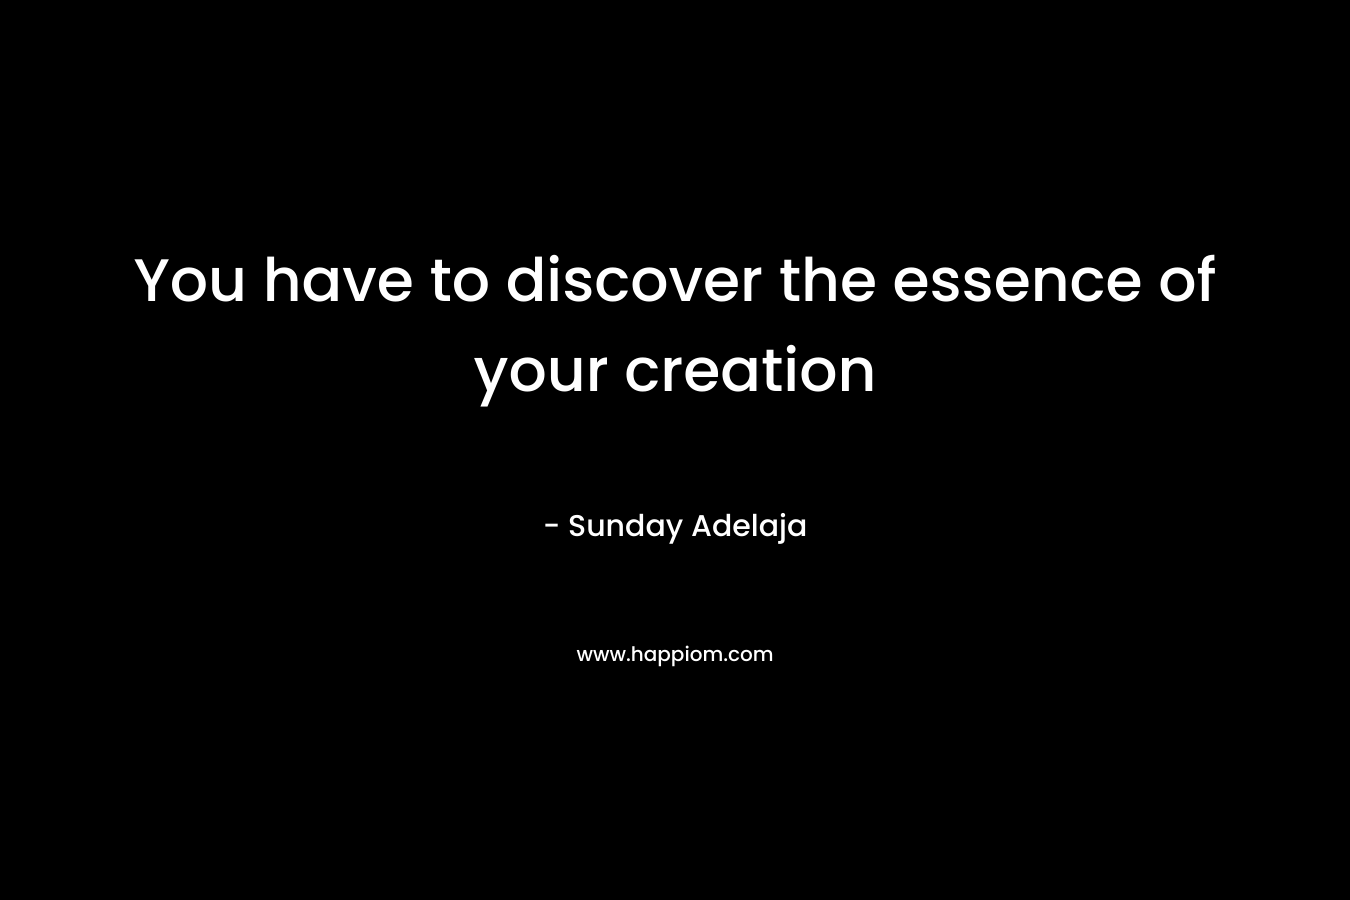 You have to discover the essence of your creation